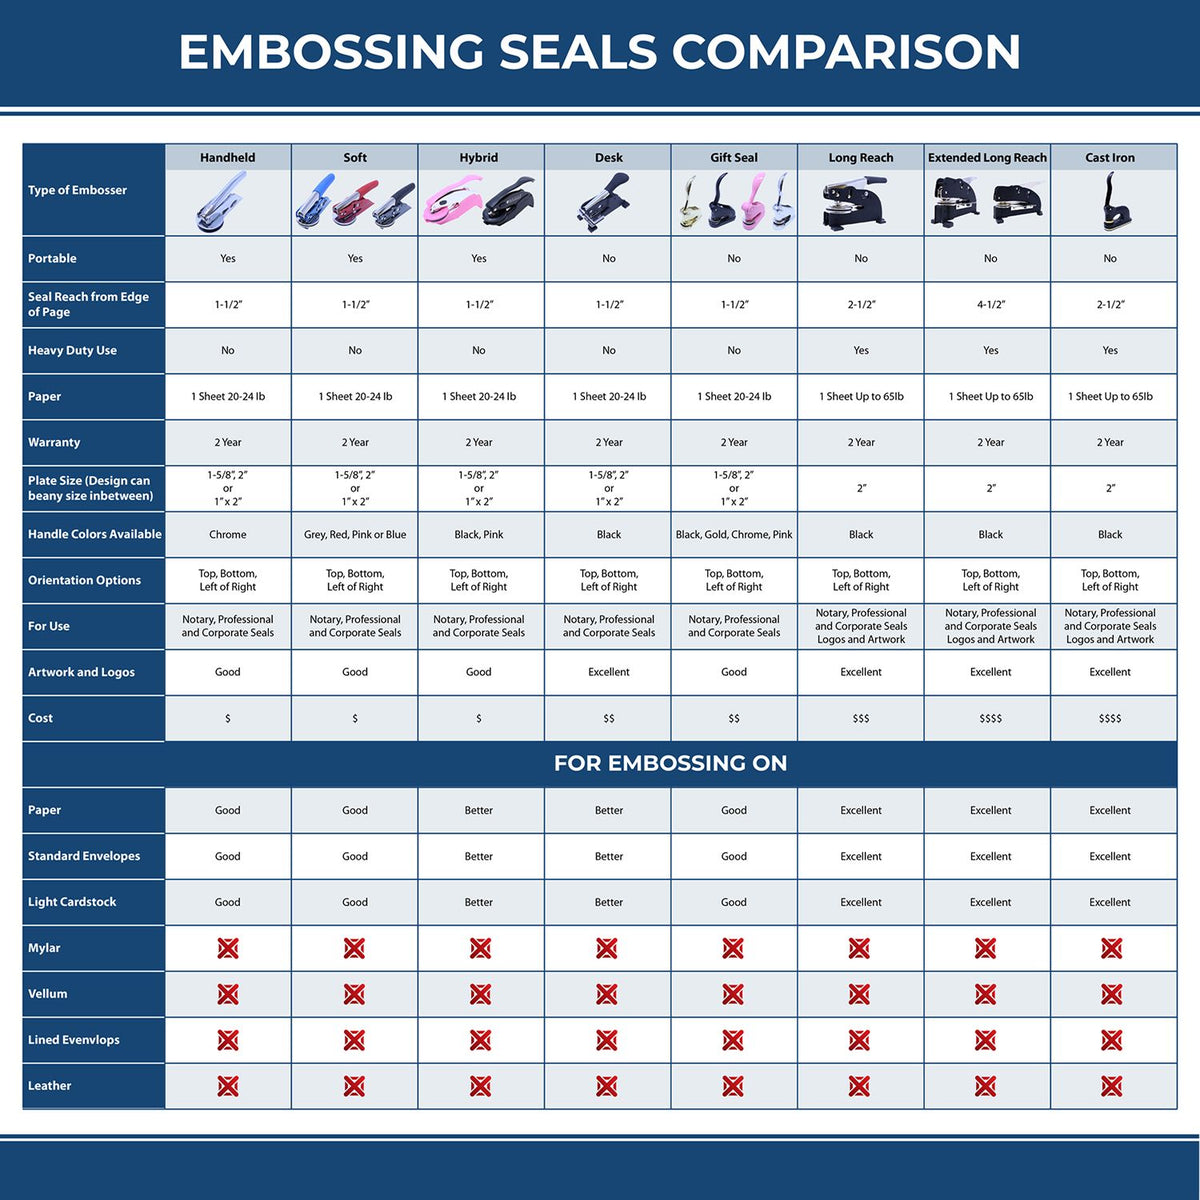 A comparison chart for the different types of mount models available for the Long Reach Montana Land Surveyor Seal.